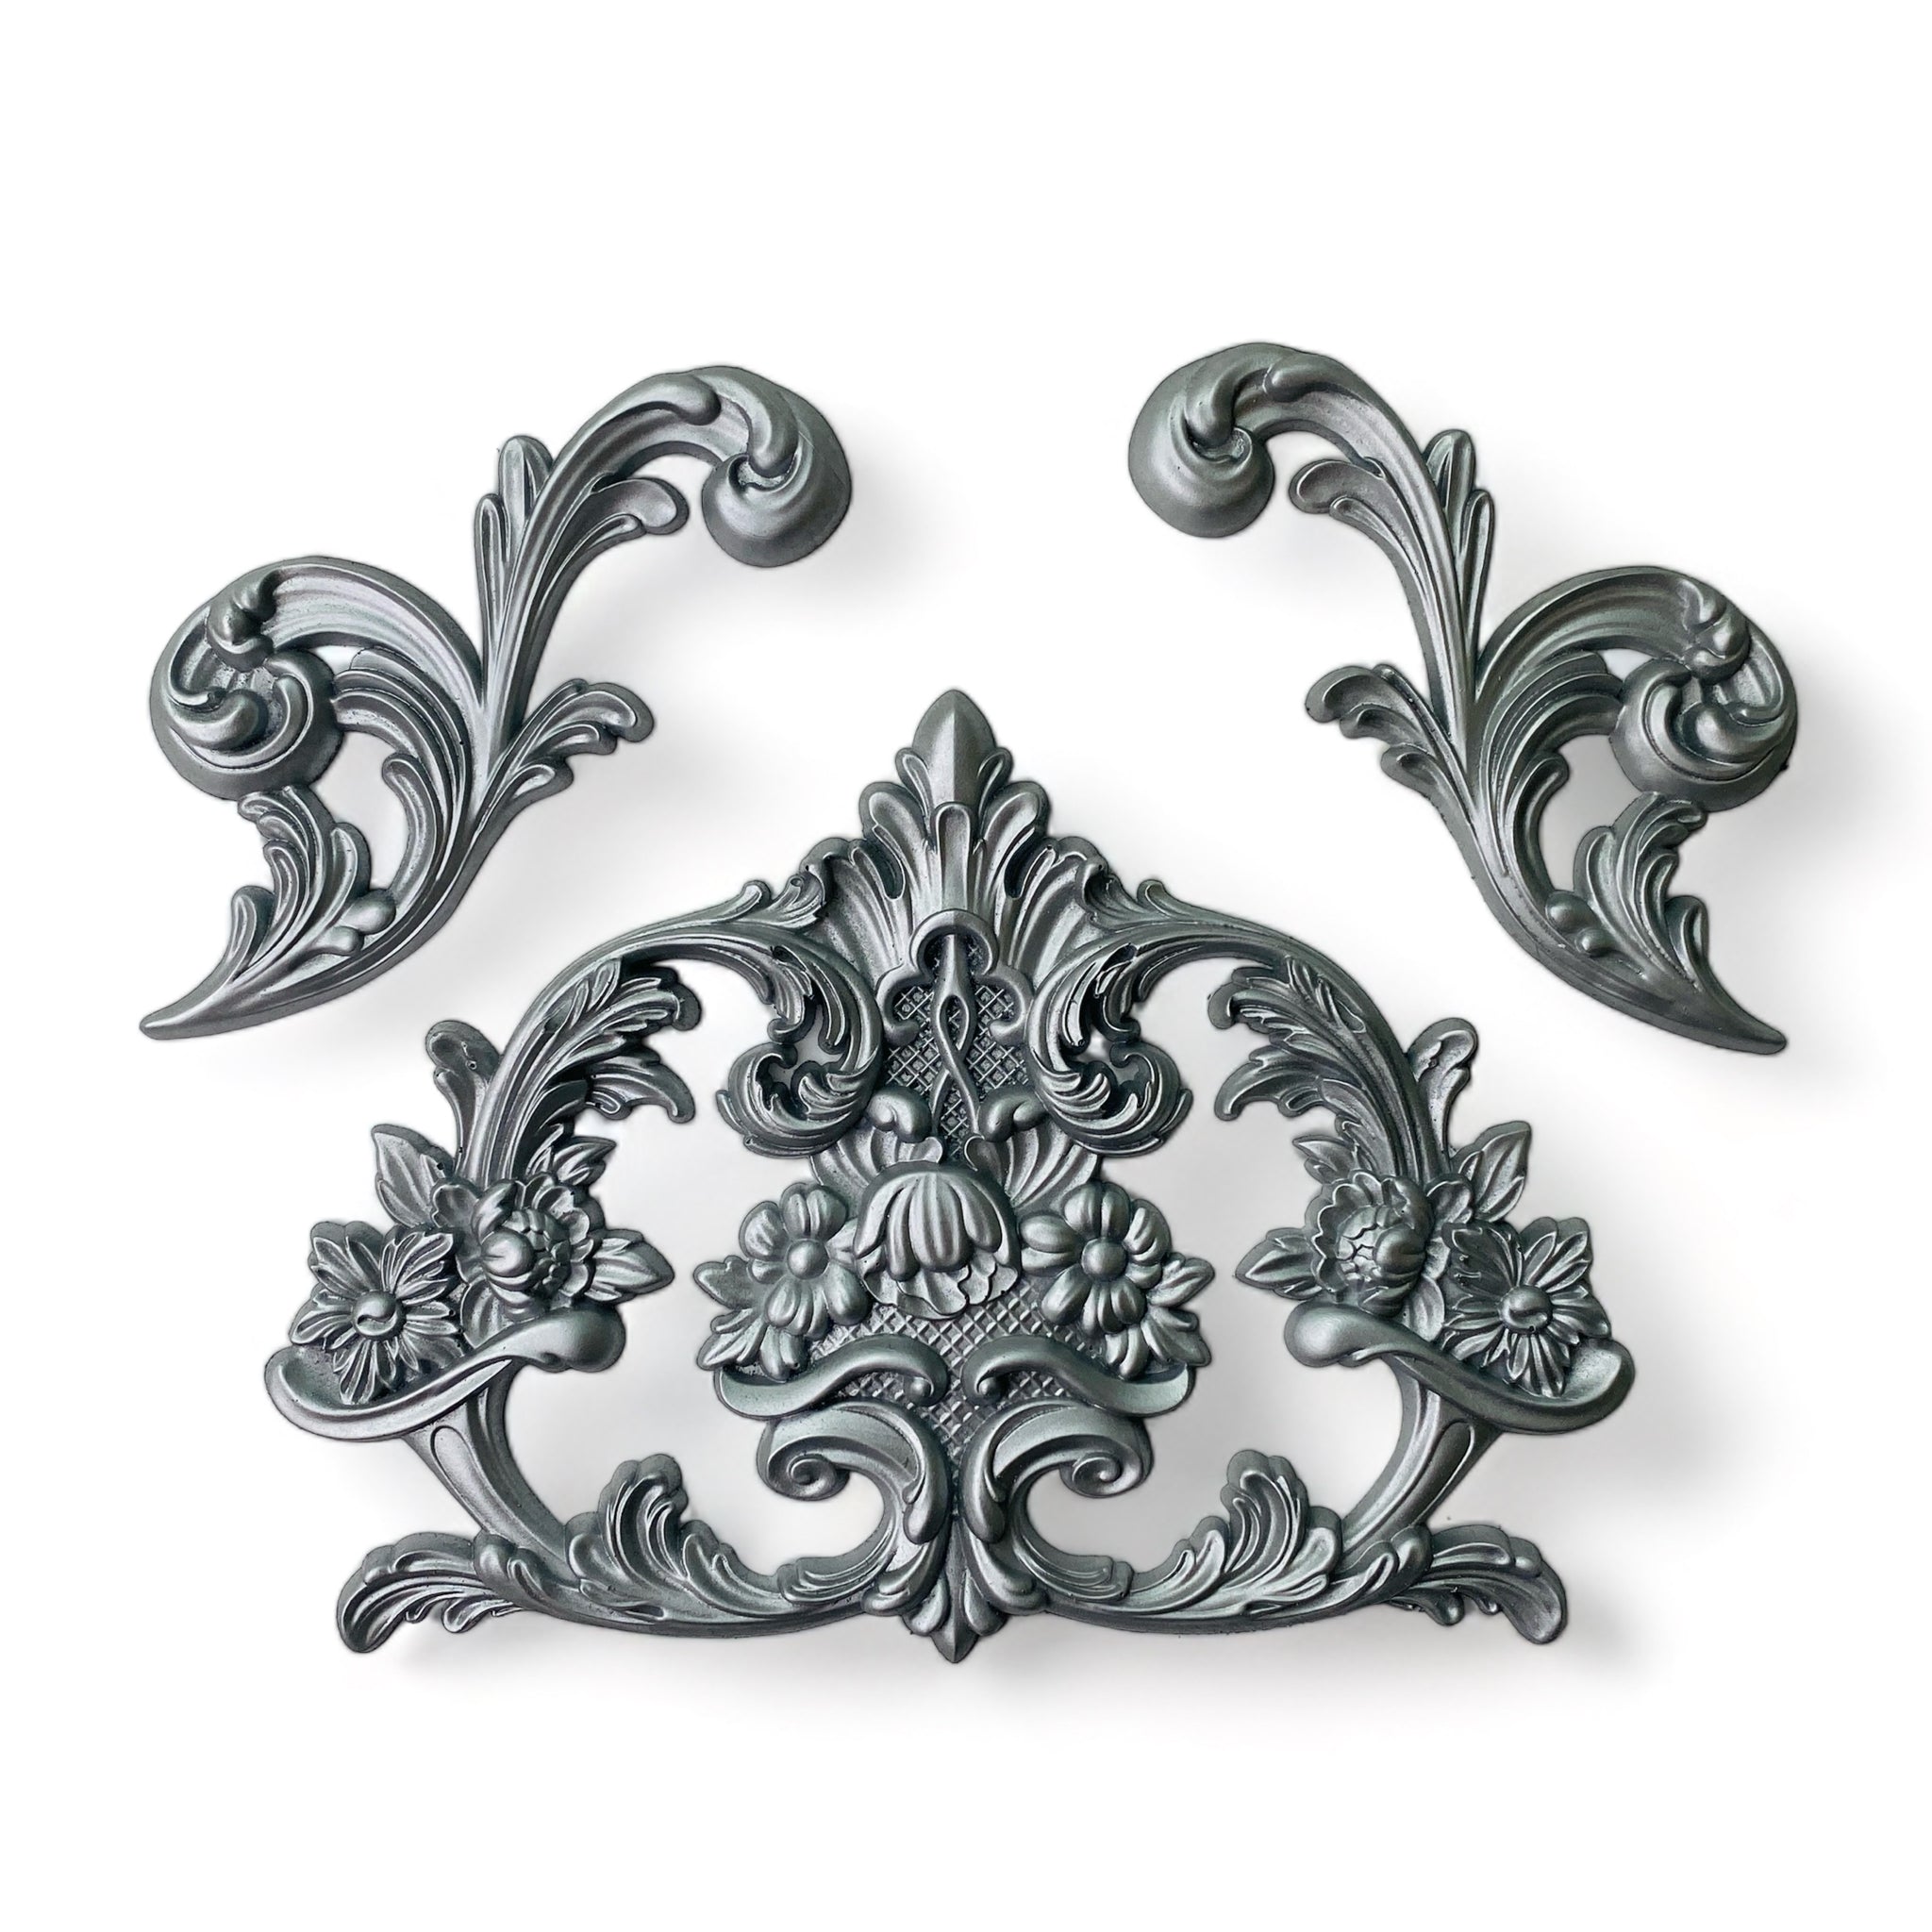 Silver colored castings of 2 swirl scrolls and a flourish crest are against a white background.